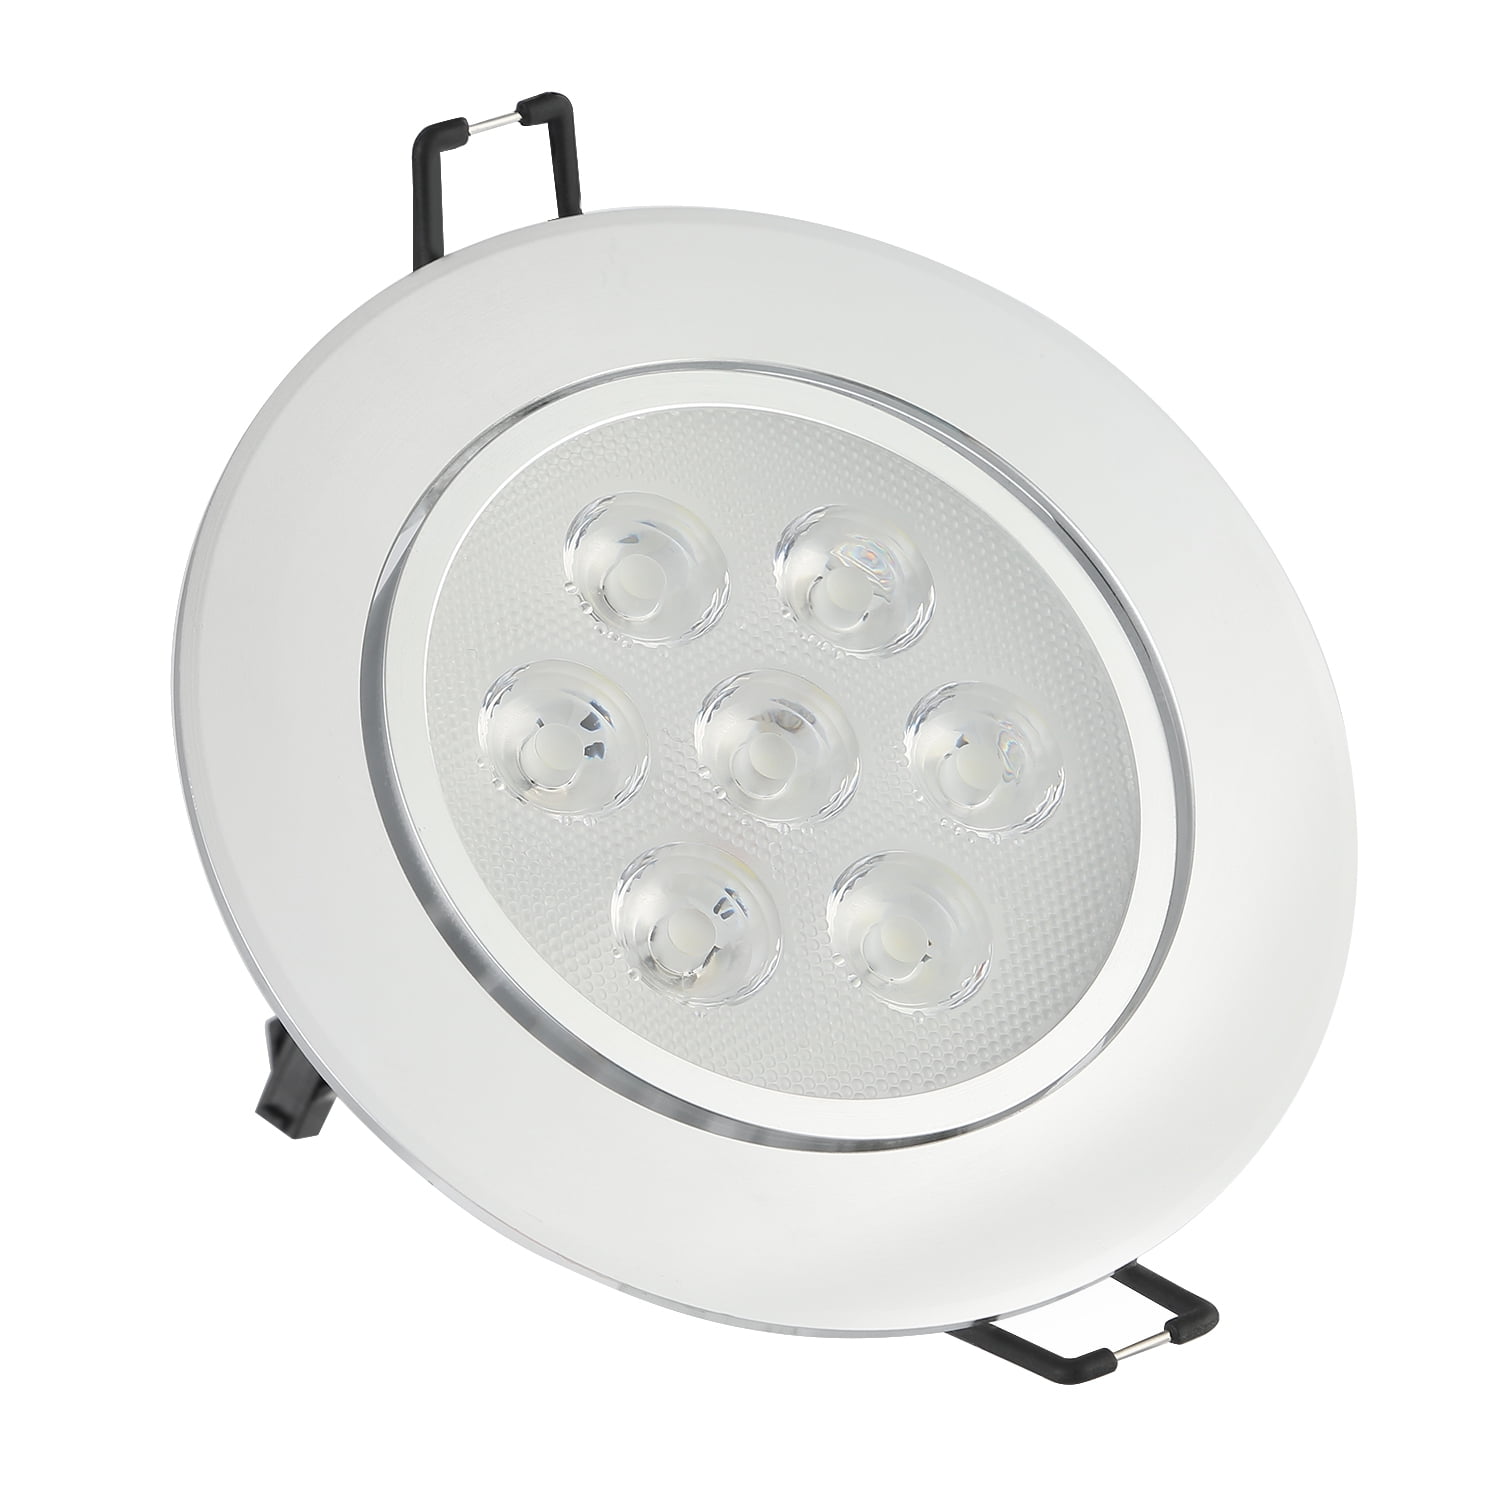 Details about   12V LED Recessed Fixture Ceiling Light Downlight RV Cabinet Spot Light Dimmable 